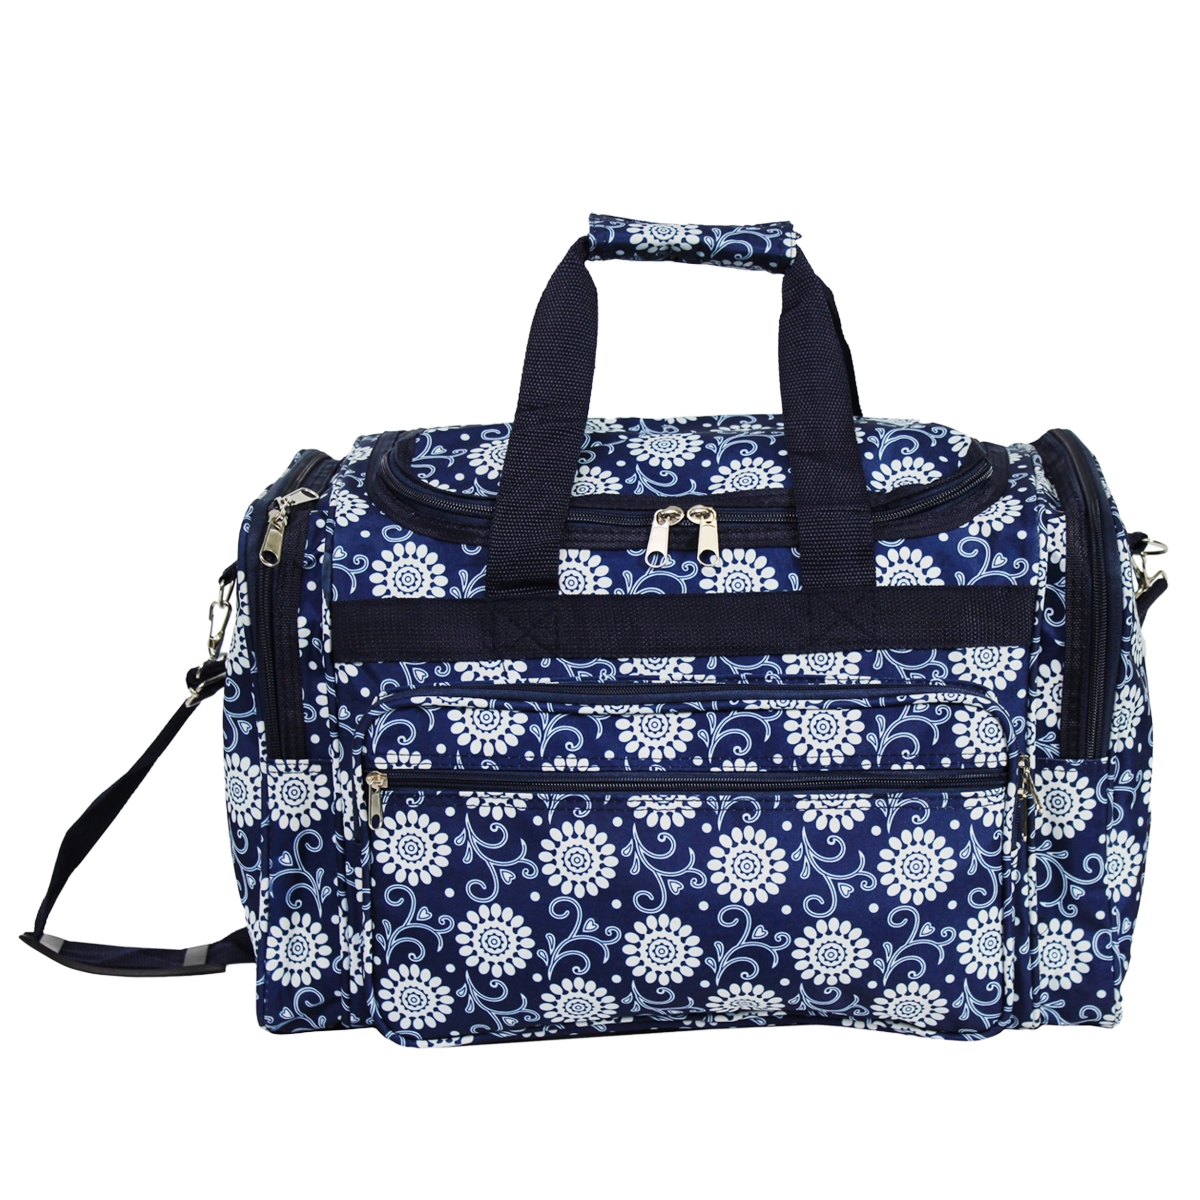 81t19-229 19 In. Carry-on Duffel Bag - Navy Vines Floral